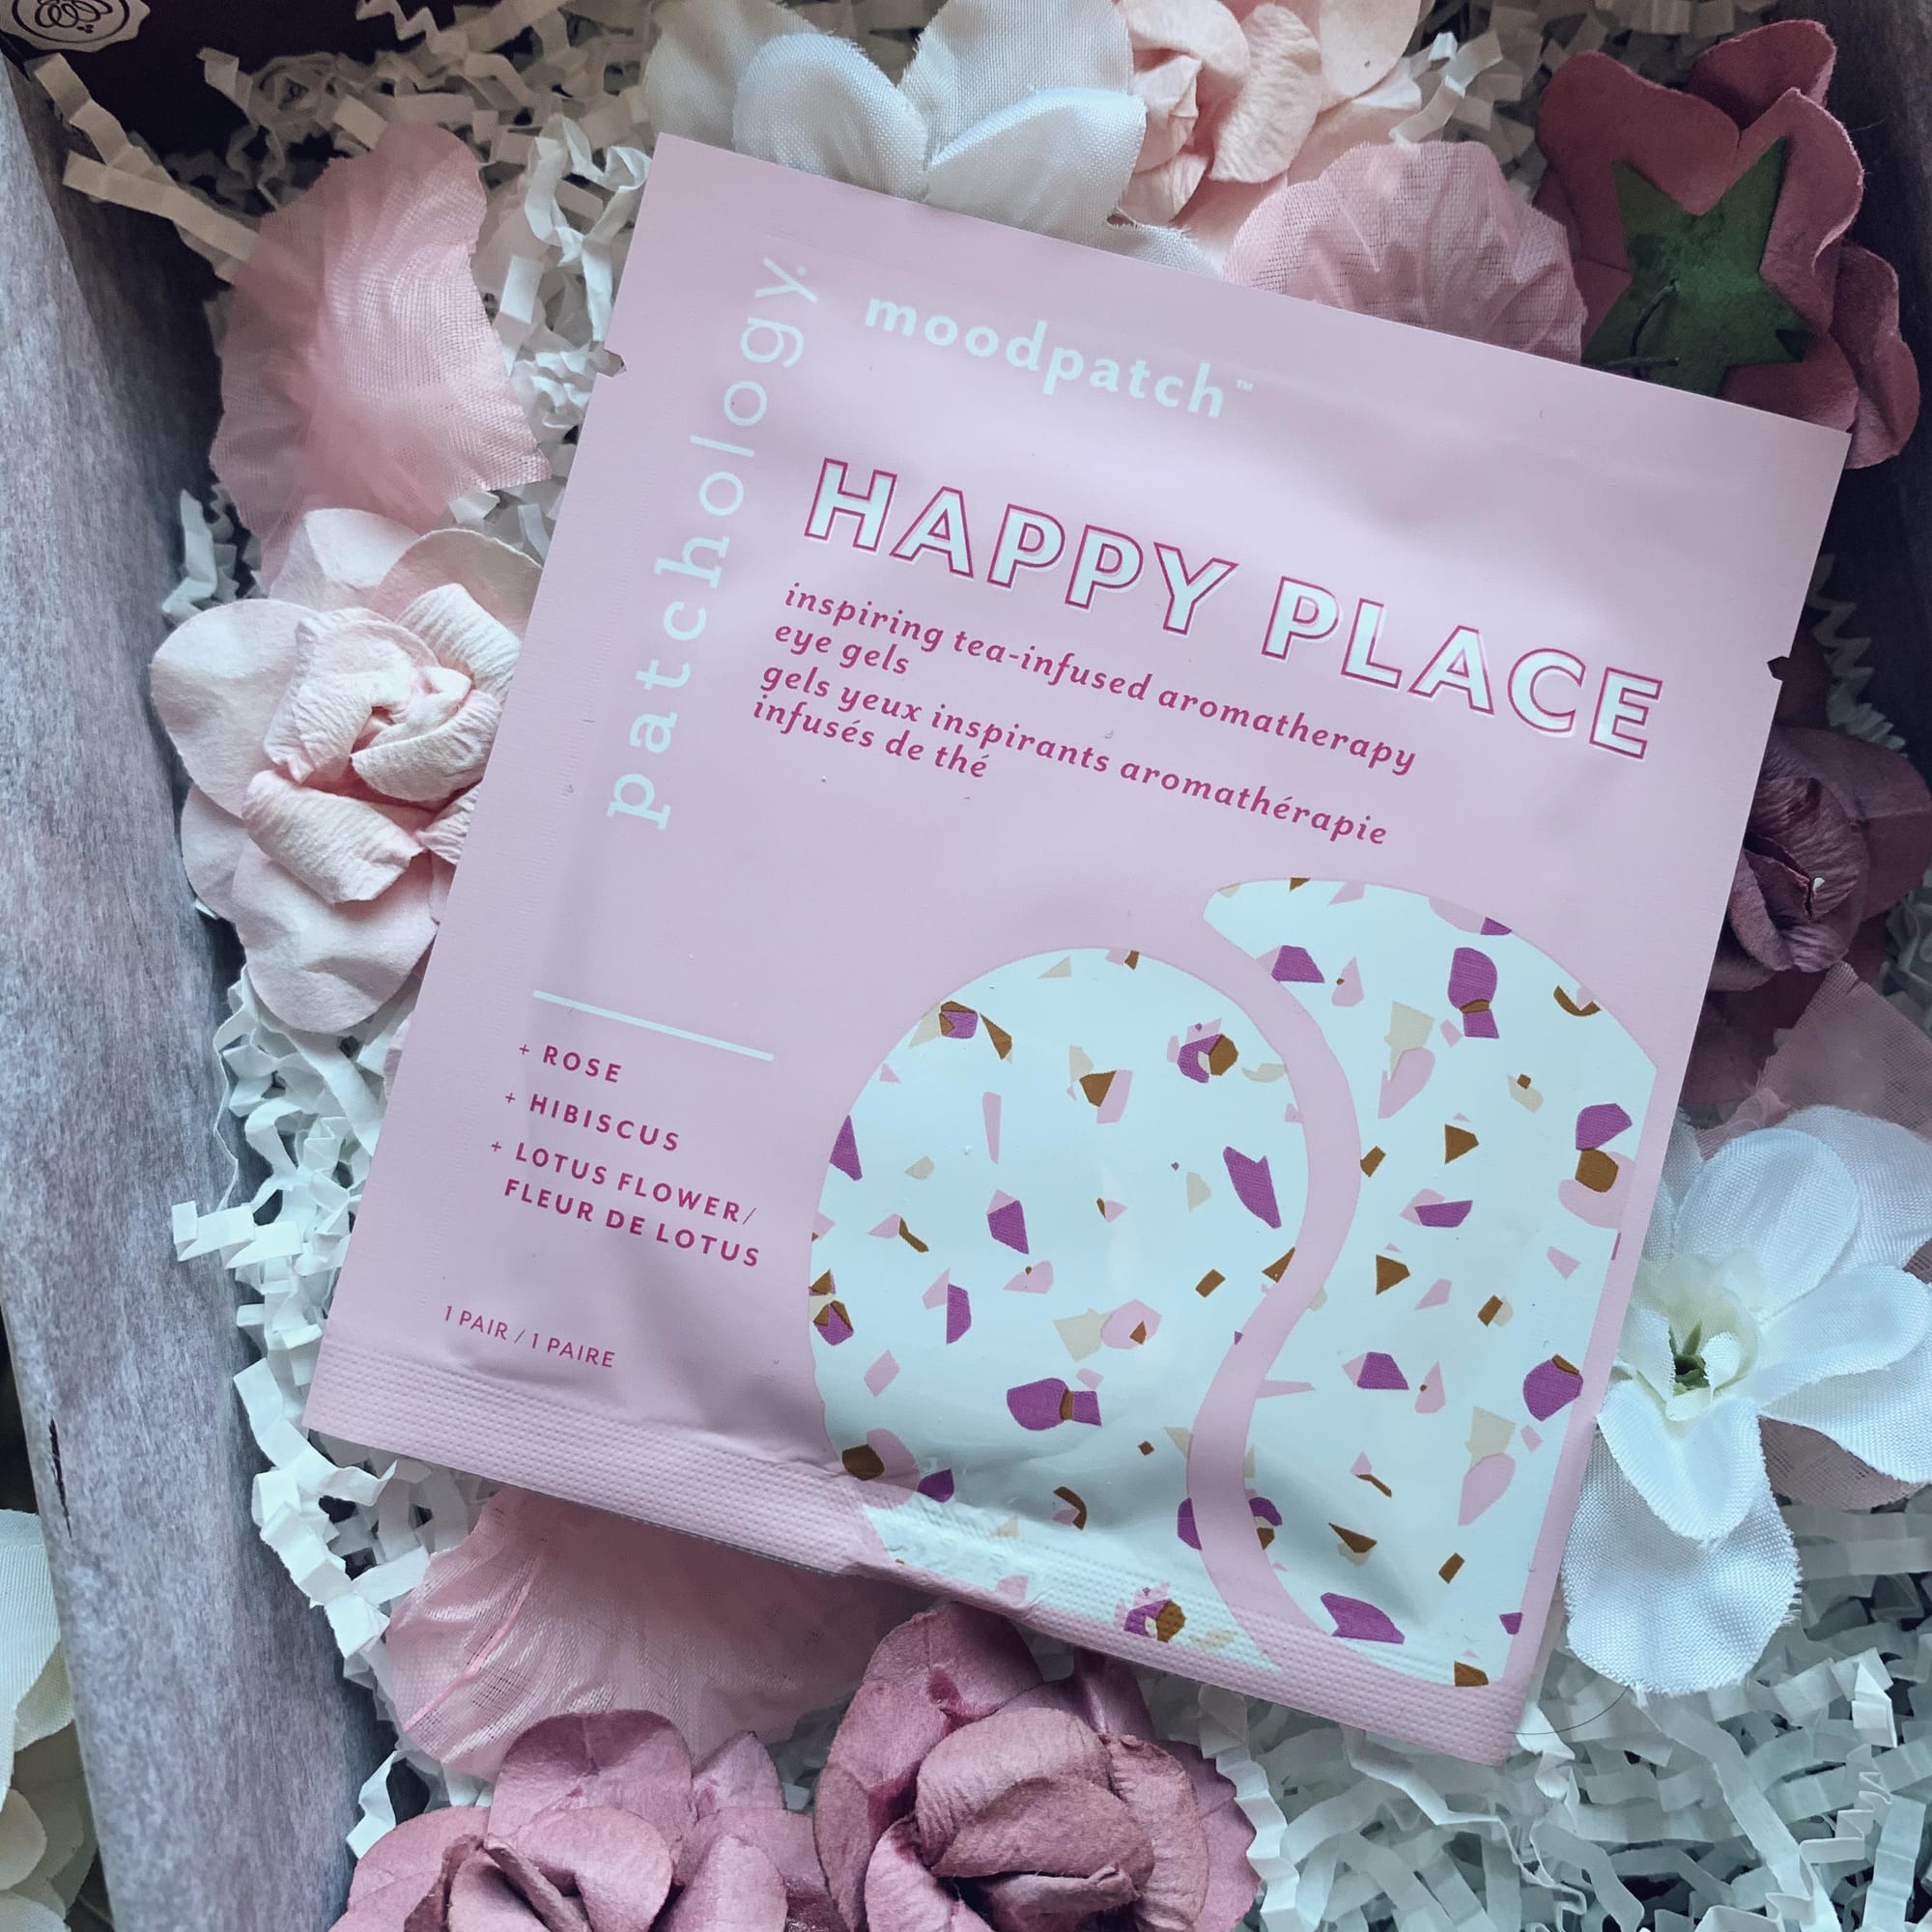 Patchology Mood Patch Happy Place Eye Gels - Only For You - Limited Edition Mother's Day Glossybox 2020 Review - Miss Boux